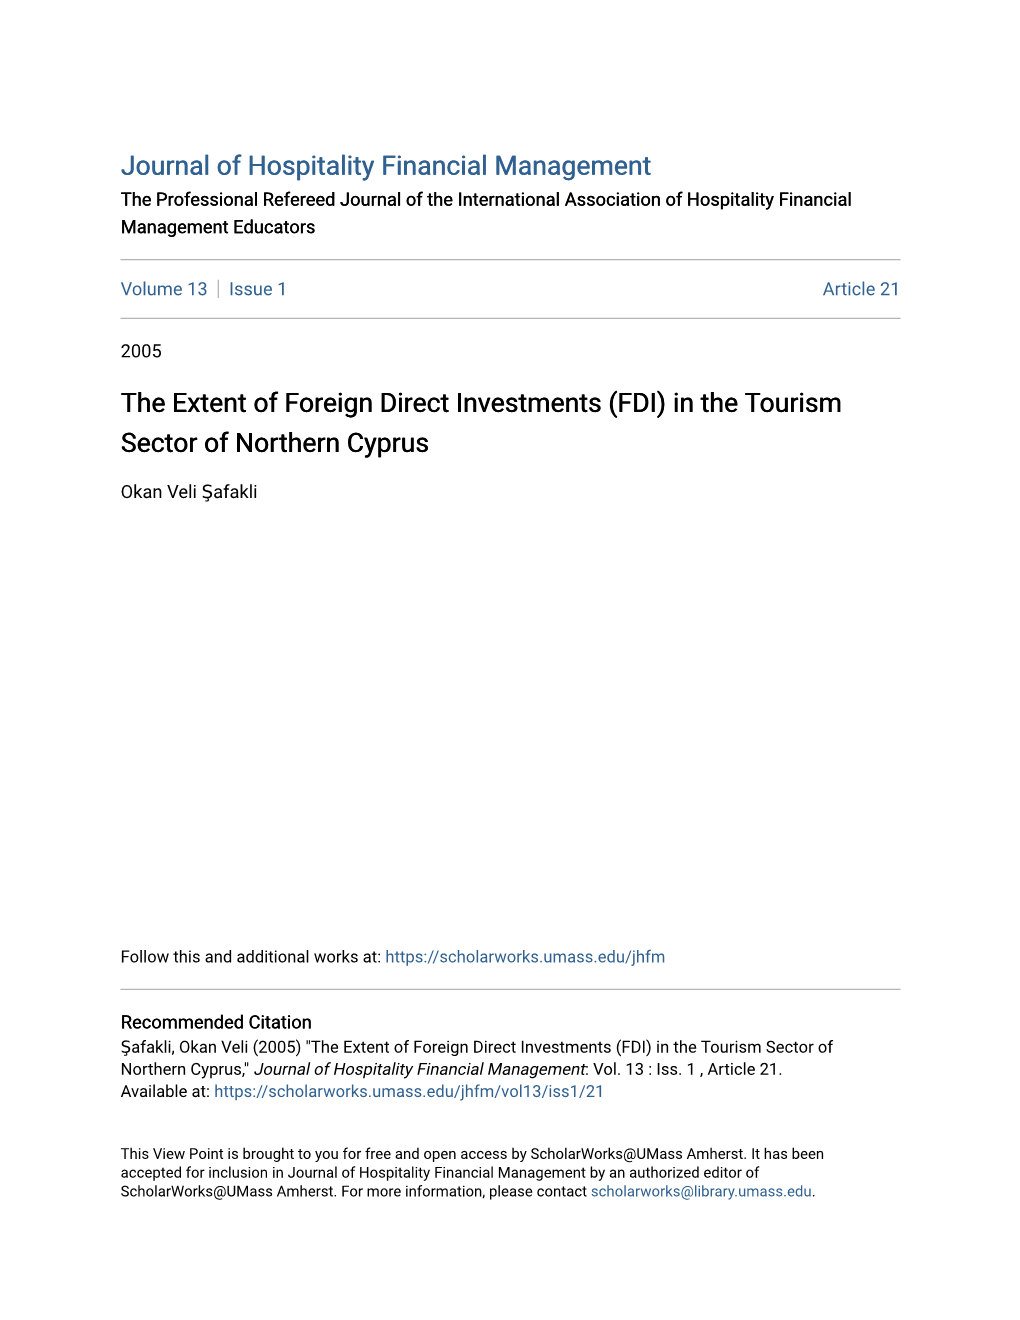 (FDI) in the Tourism Sector of Northern Cyprus